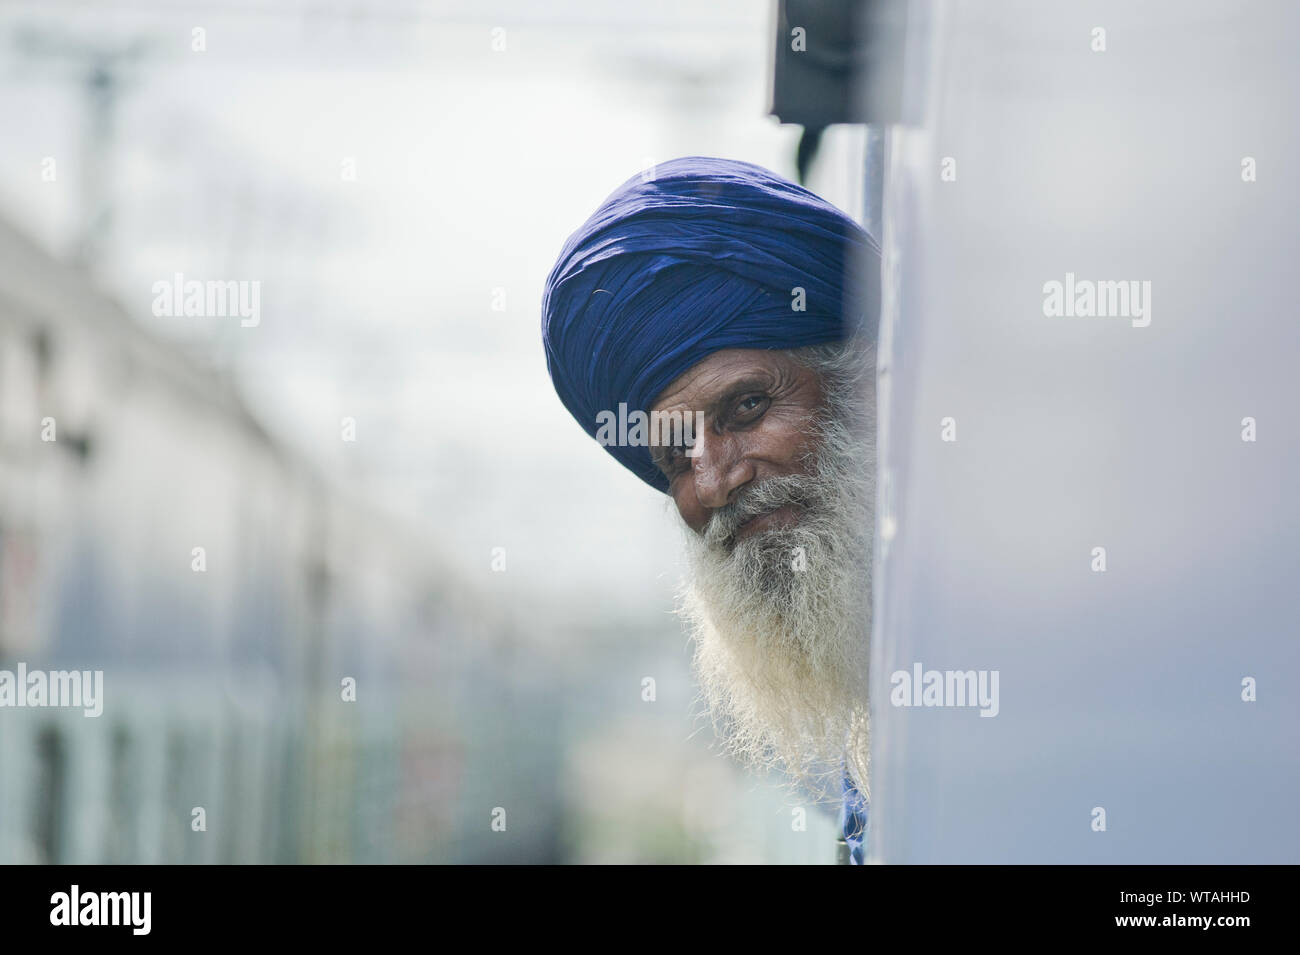 Old Sikh man looks outside a window of the train Stock Photo